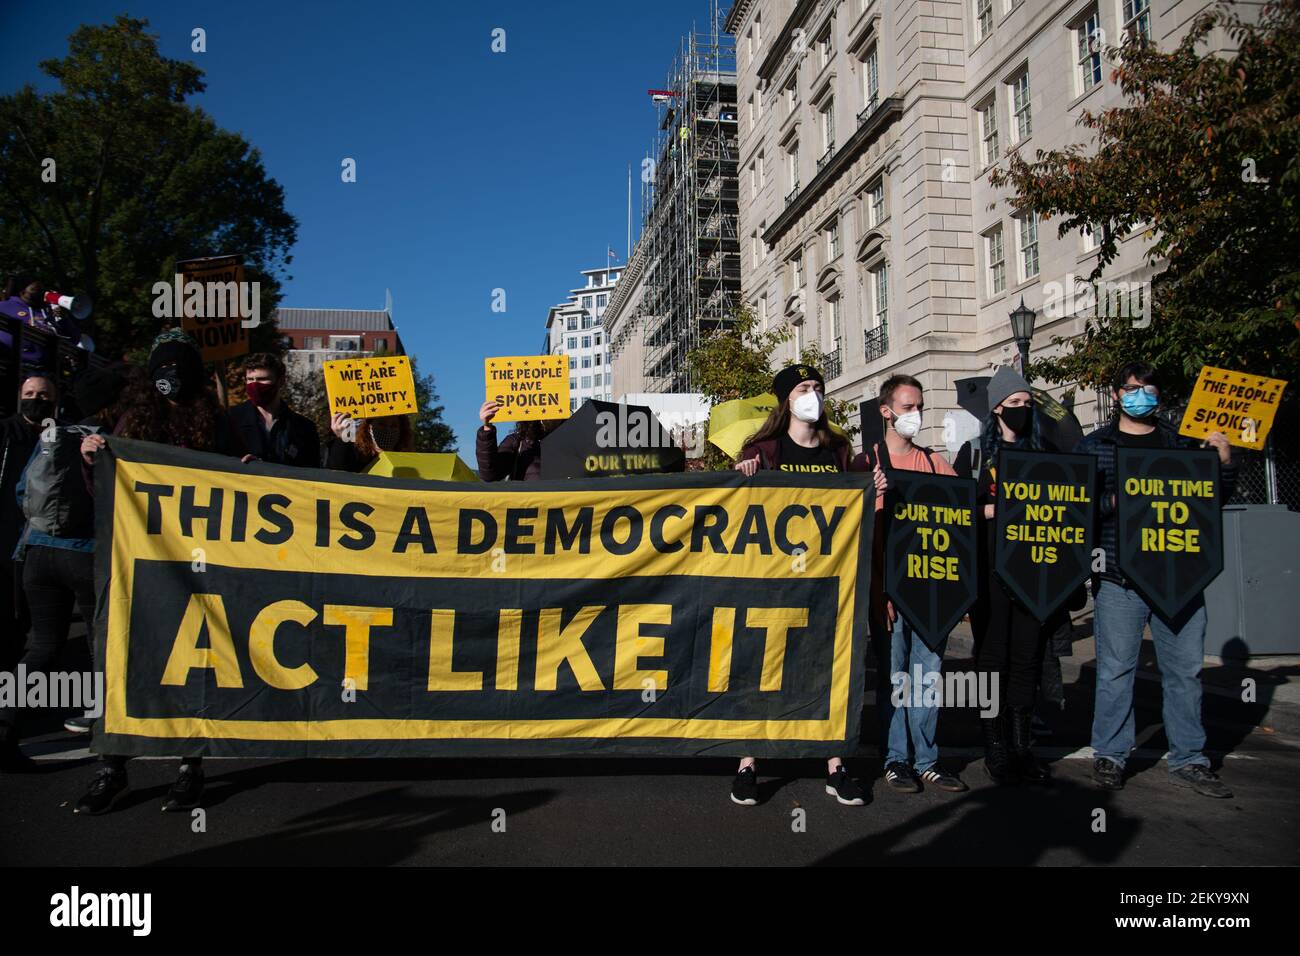 Protesters from the activist group Sunrise Movement march down H Street outside Lafayette Square in Washington, D.C. to express their objection to President Trump's response to the election results on November 5, 2020. (Photo by Matthew Rodier/Sipa USA) Stock Photo